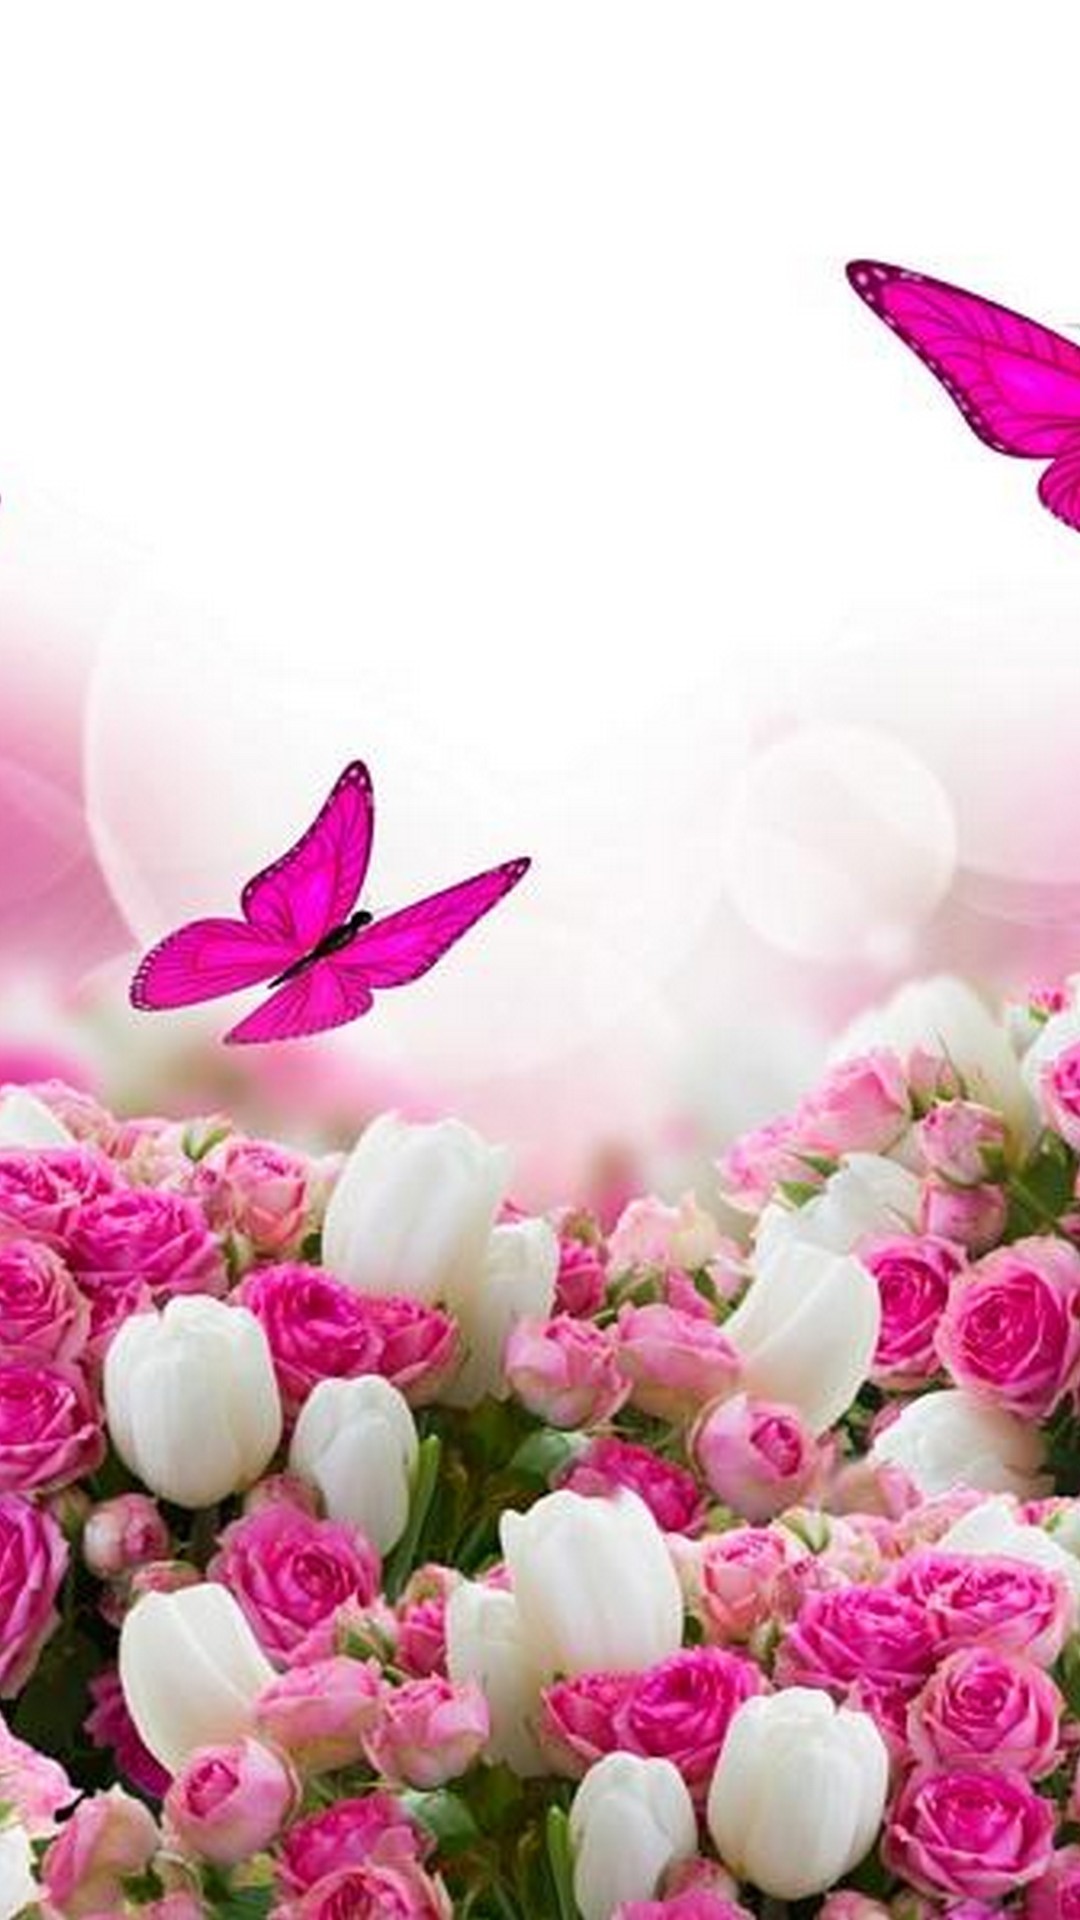 Pink Butterfly Background For Android Resolution 1080x1920